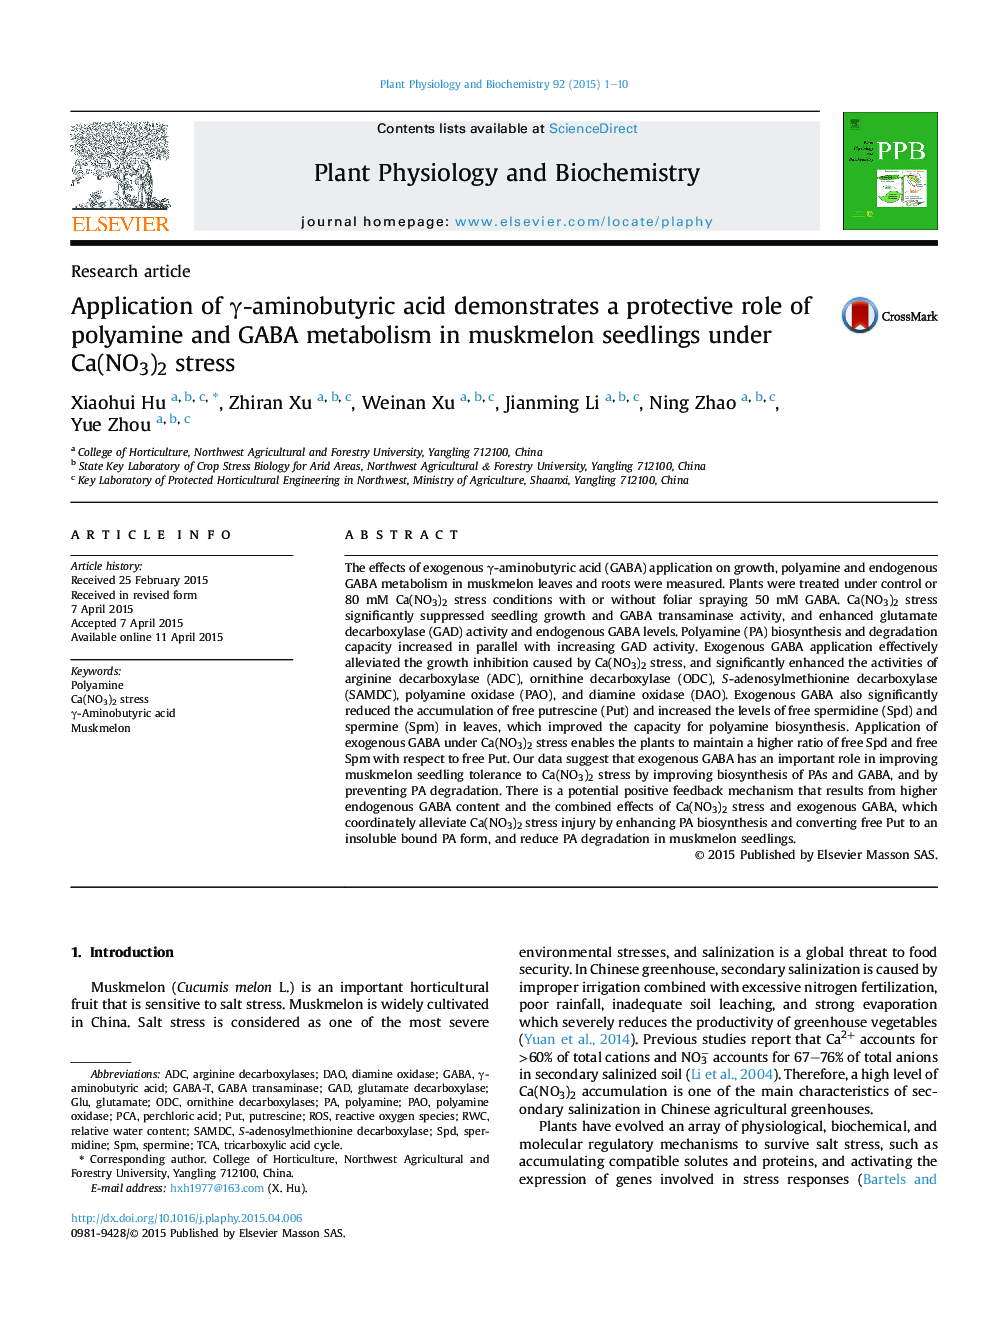 Application of Î³-aminobutyric acid demonstrates a protective role of polyamine and GABA metabolism in muskmelon seedlings under Ca(NO3)2 stress